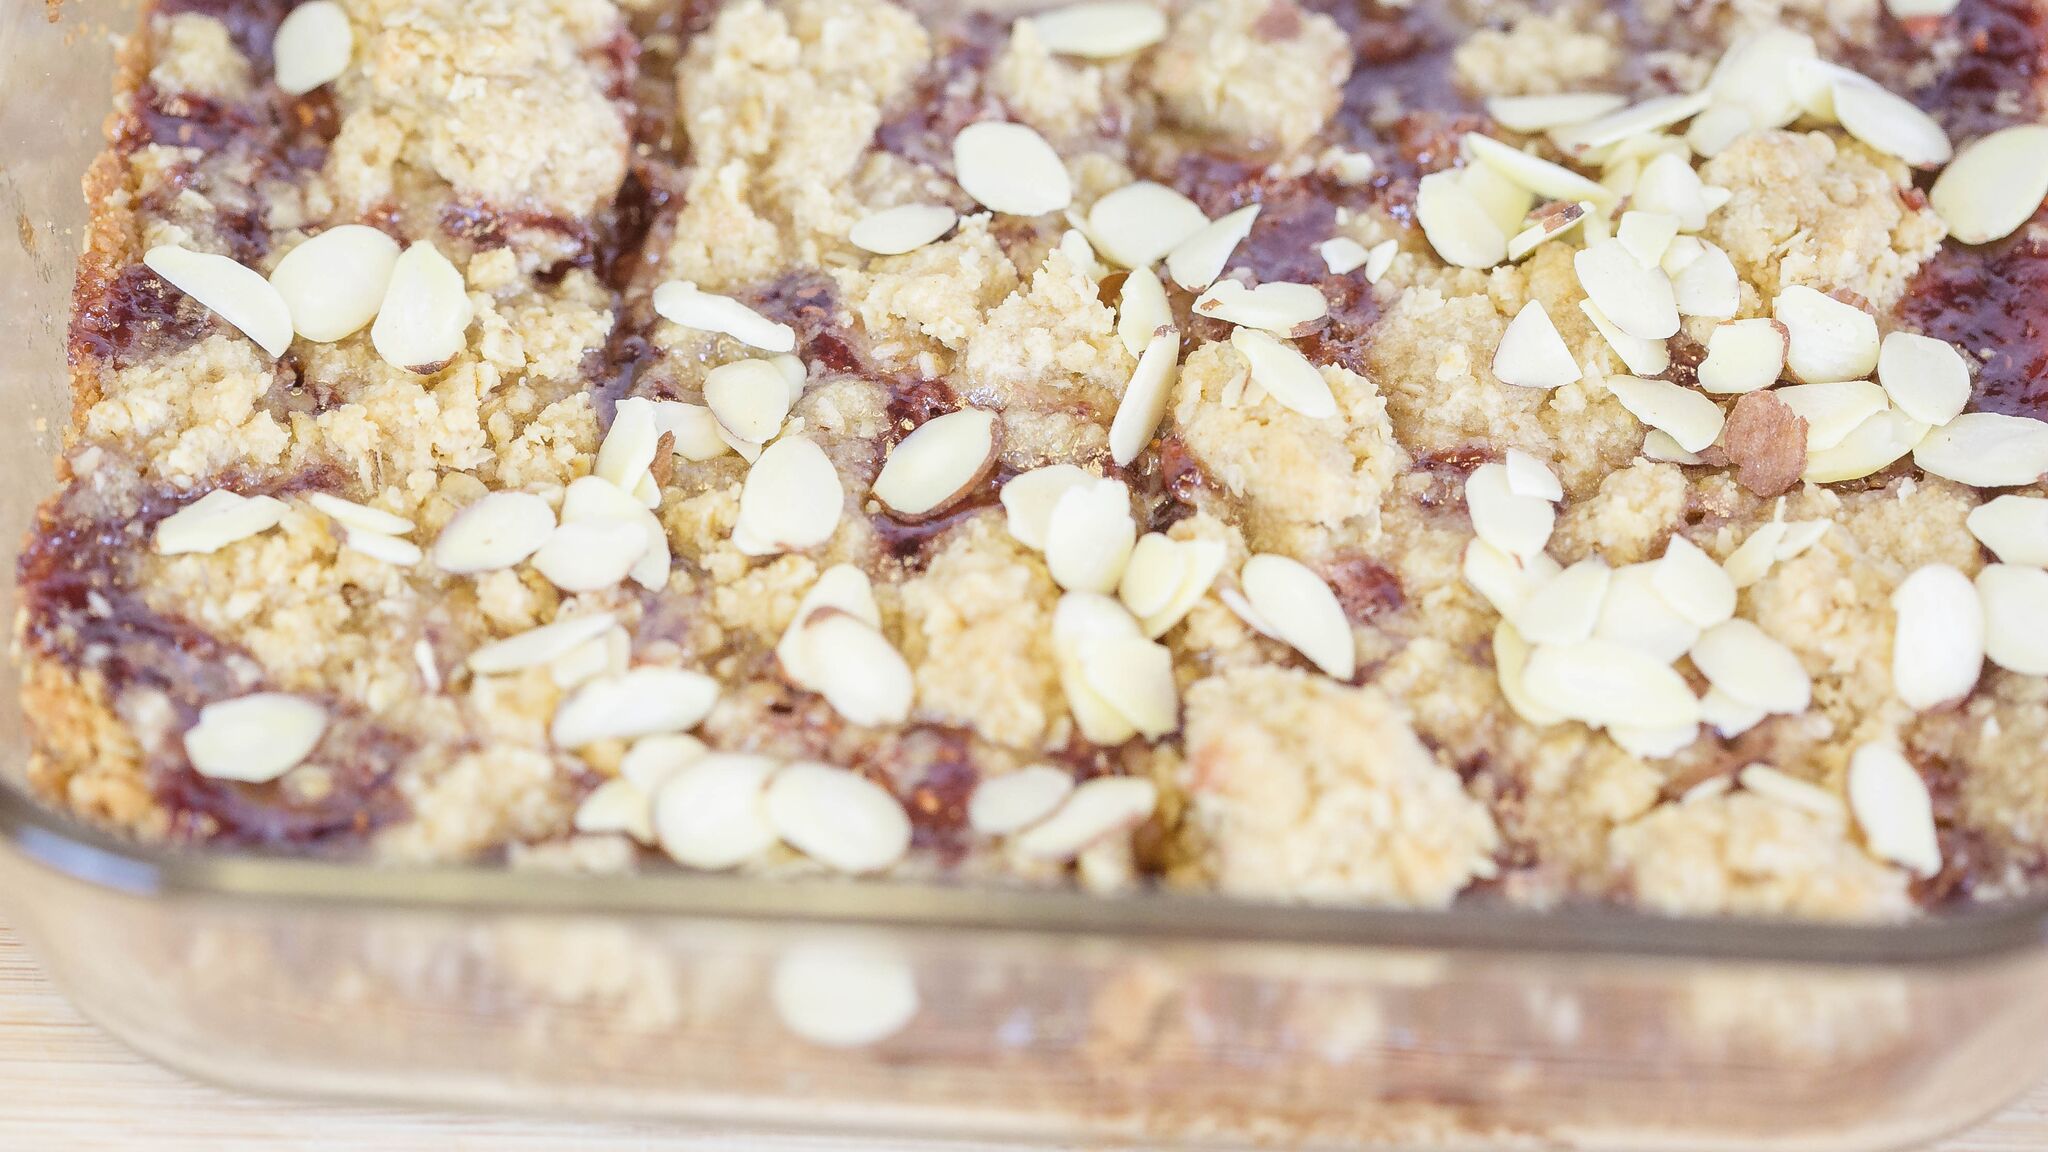 Bake until mixture is bubbly and top with almonds. 